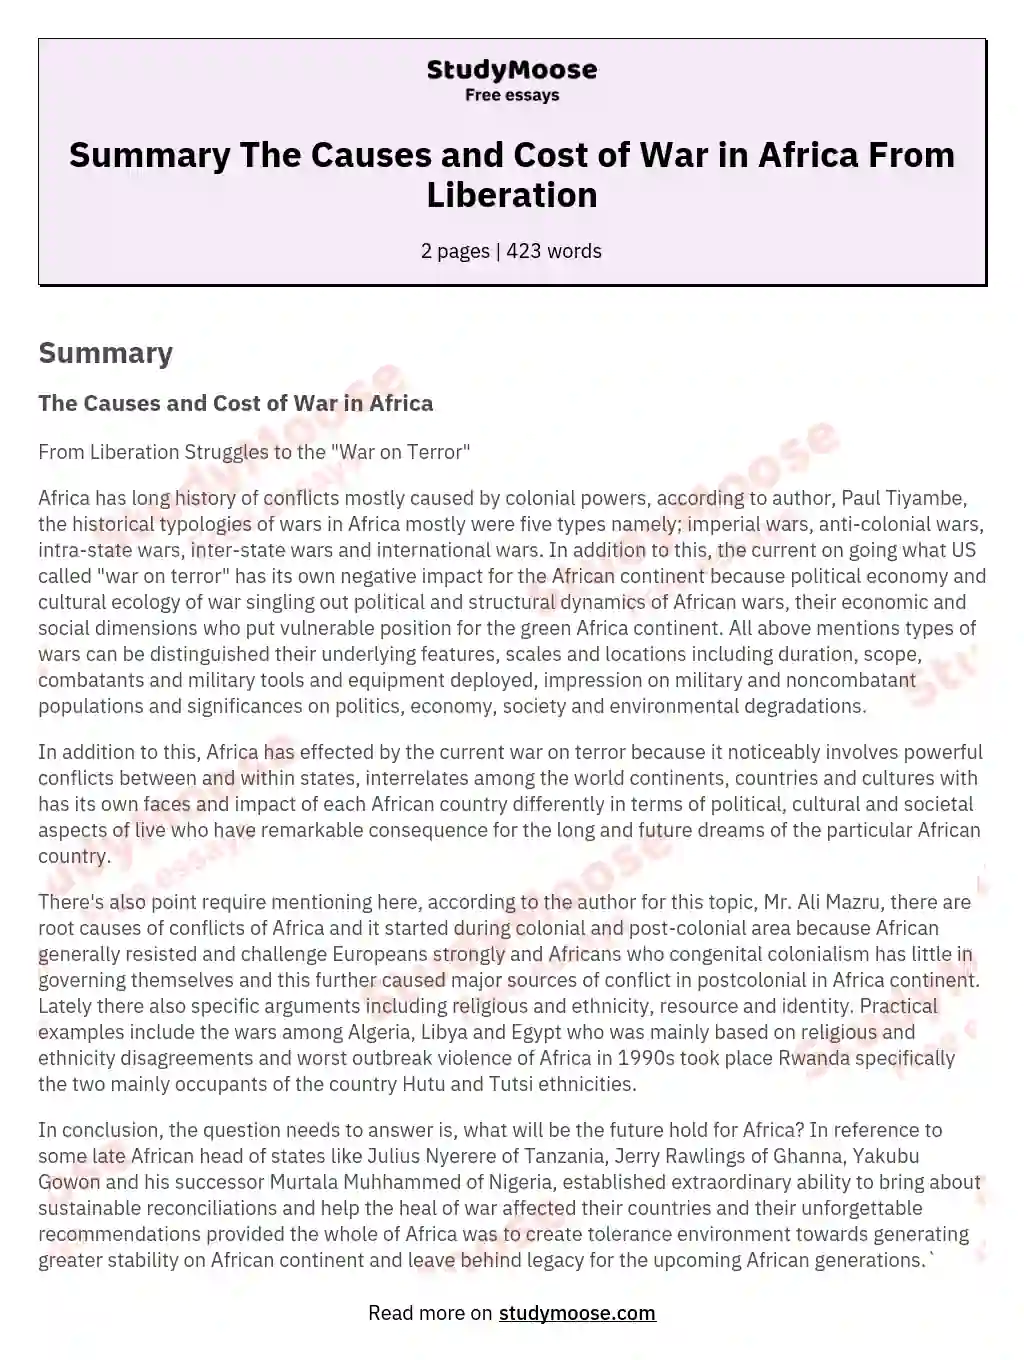 Summary The Causes and Cost of War in Africa From Liberation